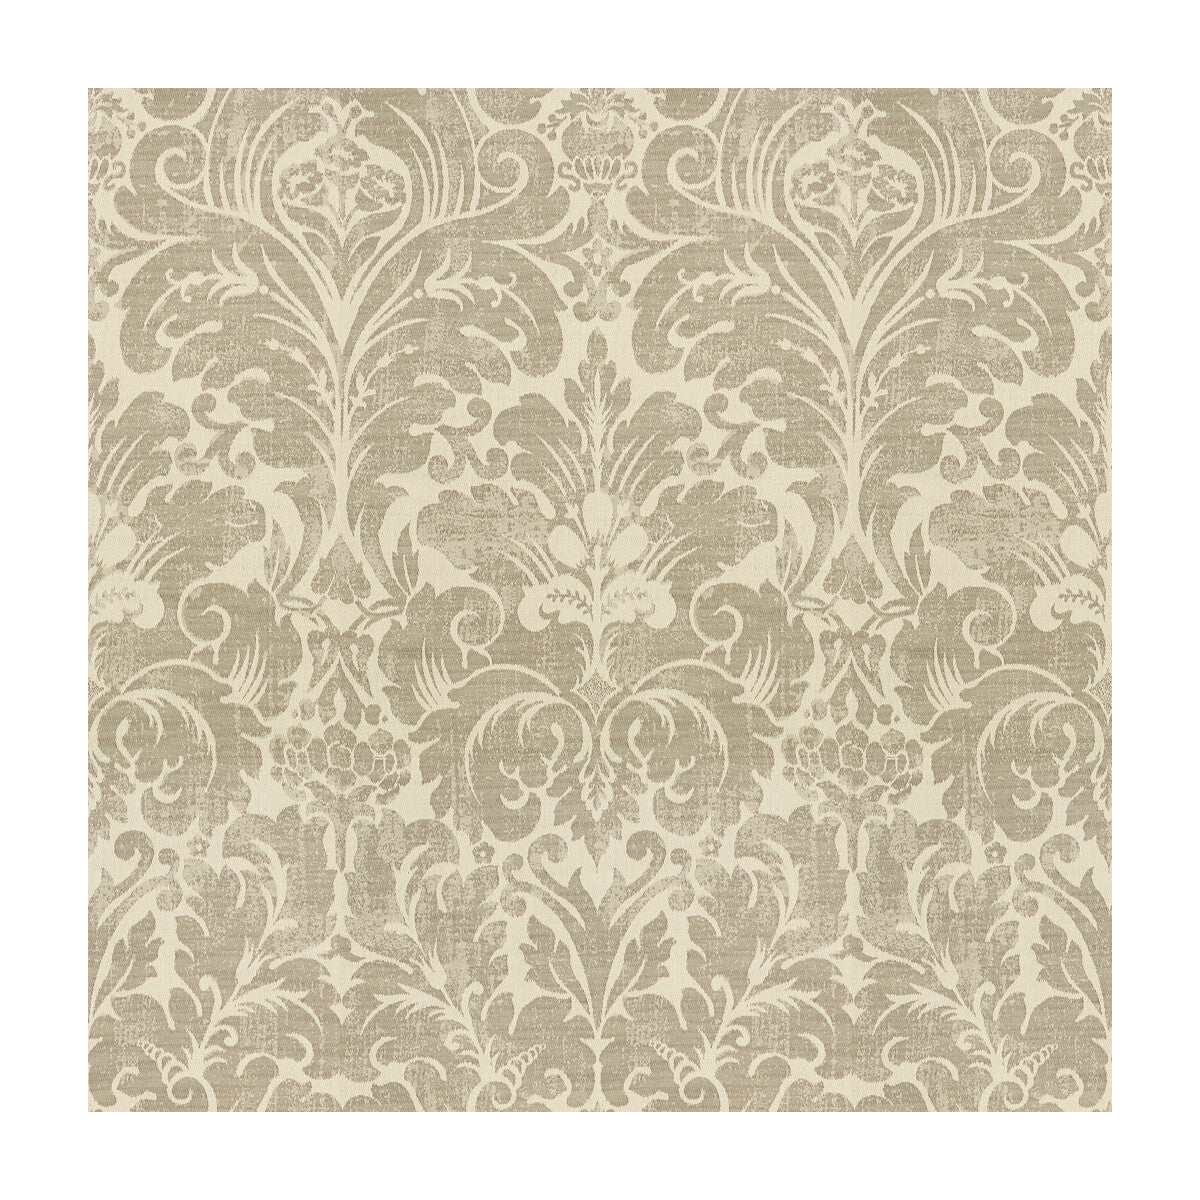 Coeur fabric in smoke color - pattern 31974.106.0 - by Kravet Basics in the Candice Olson collection